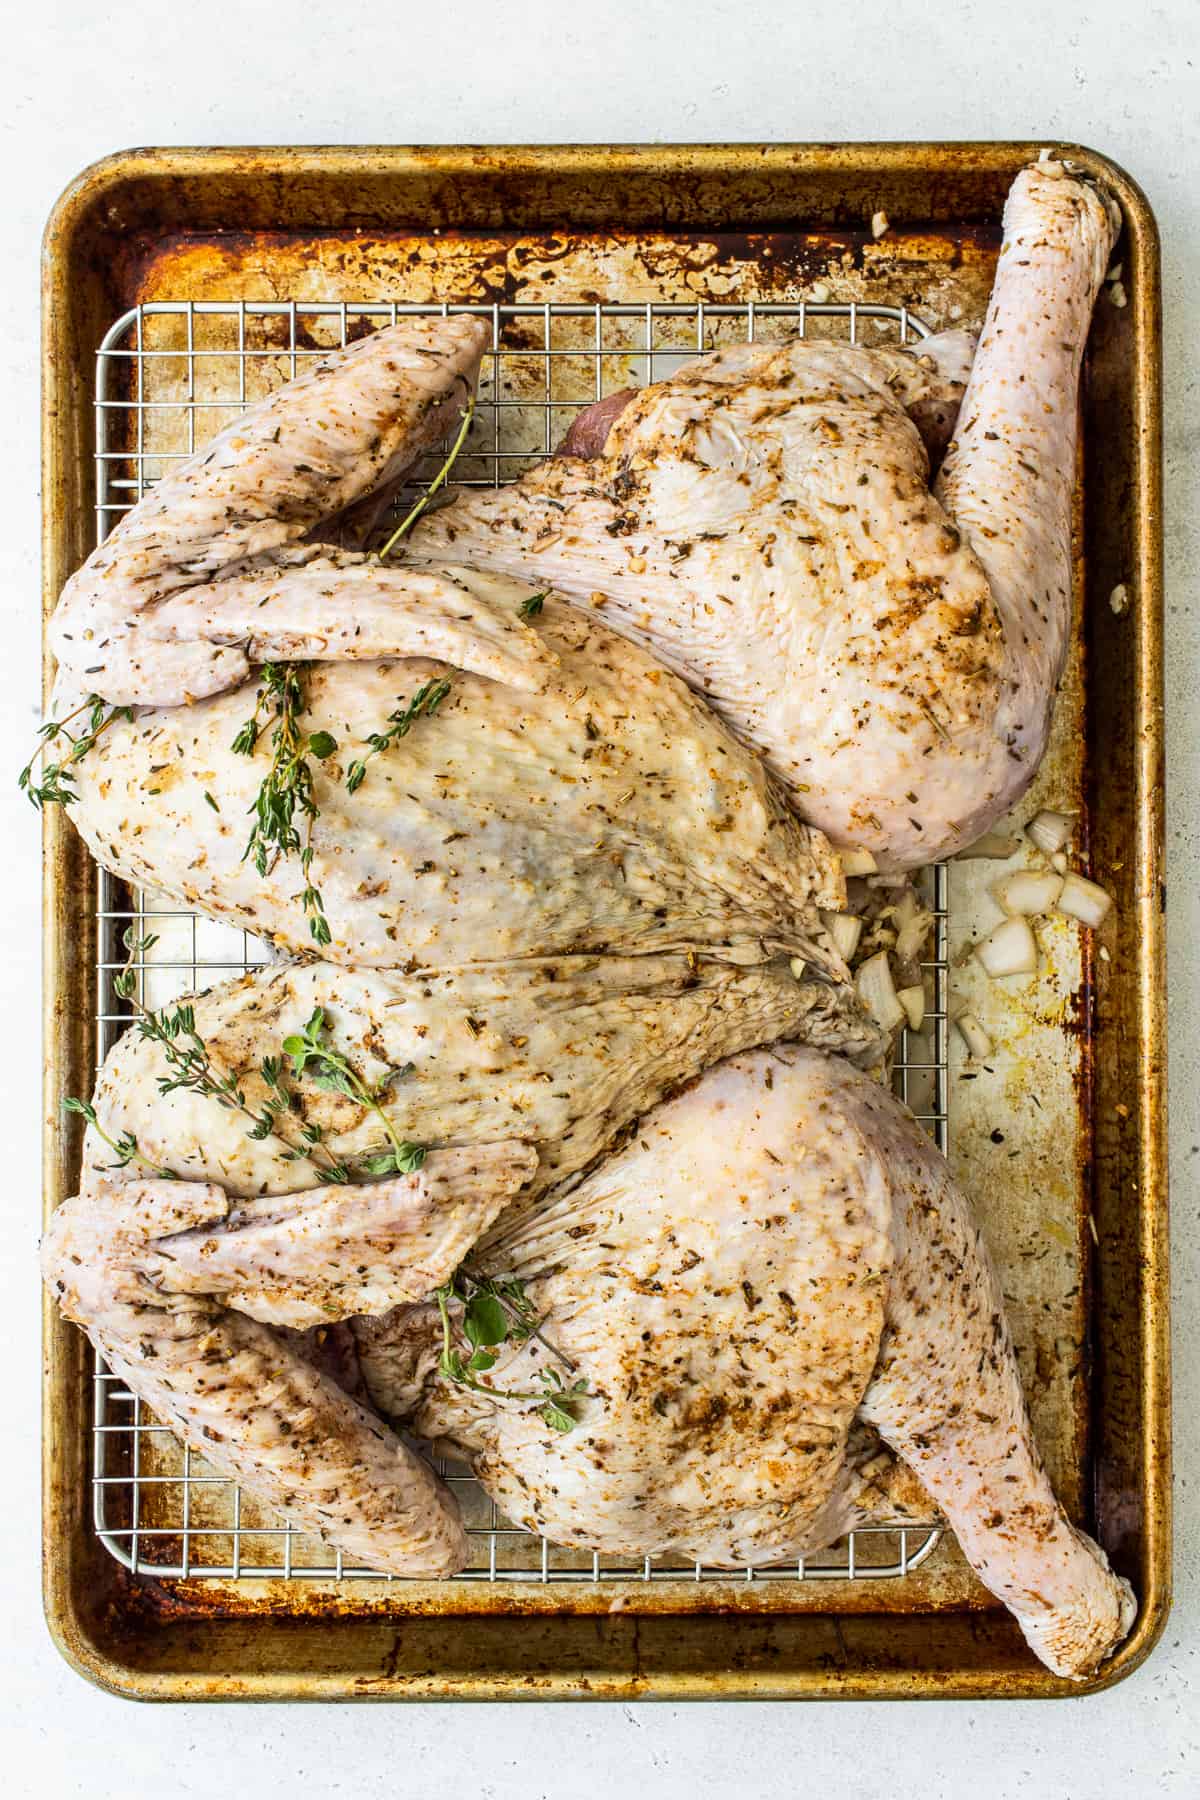 Spatchcocked turkey on a baking sheet with fresh herbs.